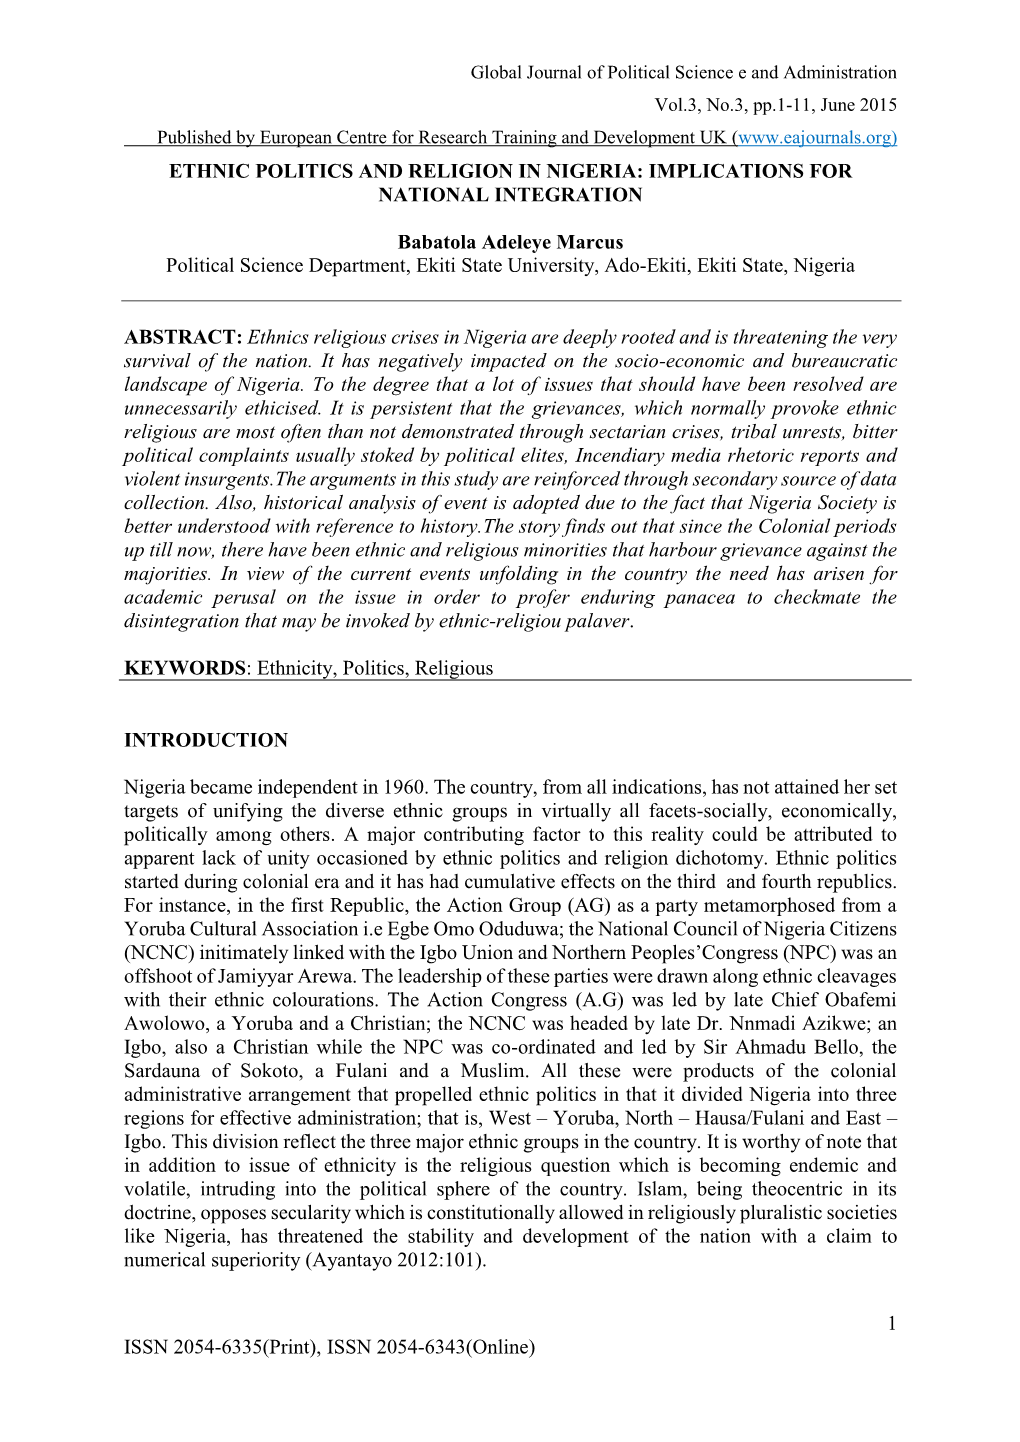 Ethnic Politics and Religion in Nigeria: Implications for National Integration